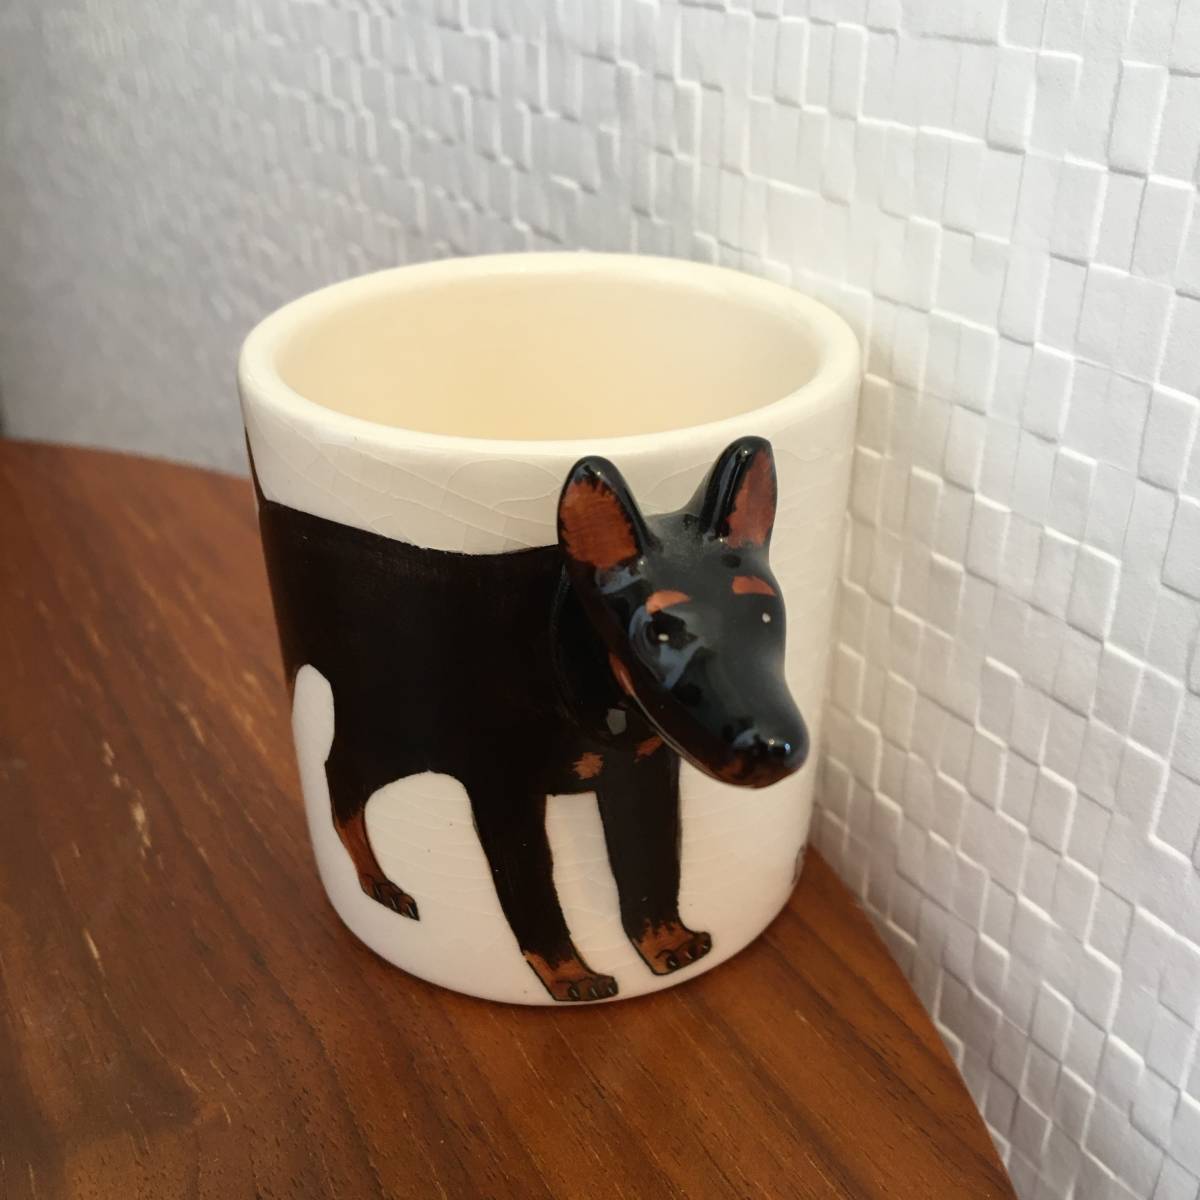  Doberman l cup & saucer set animal 3D solid collection ceramics hand made dog gift coffee CUP Espresso ( new goods )( prompt decision )